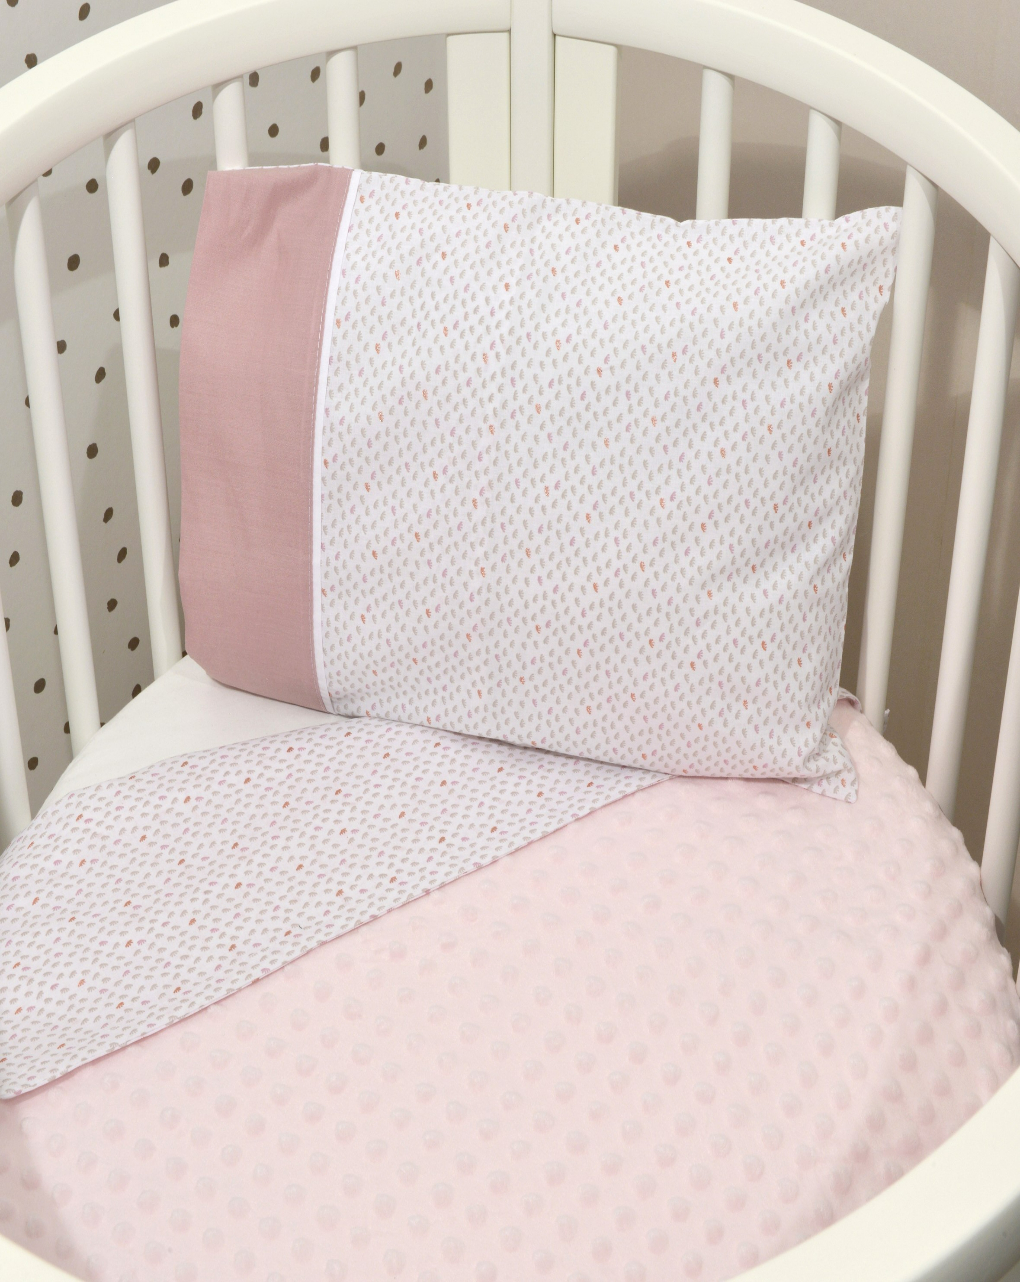 Baby oliver minky κουβέρτα κρεβατιού dusty pink 46-6724-402 - BABY OLIVER